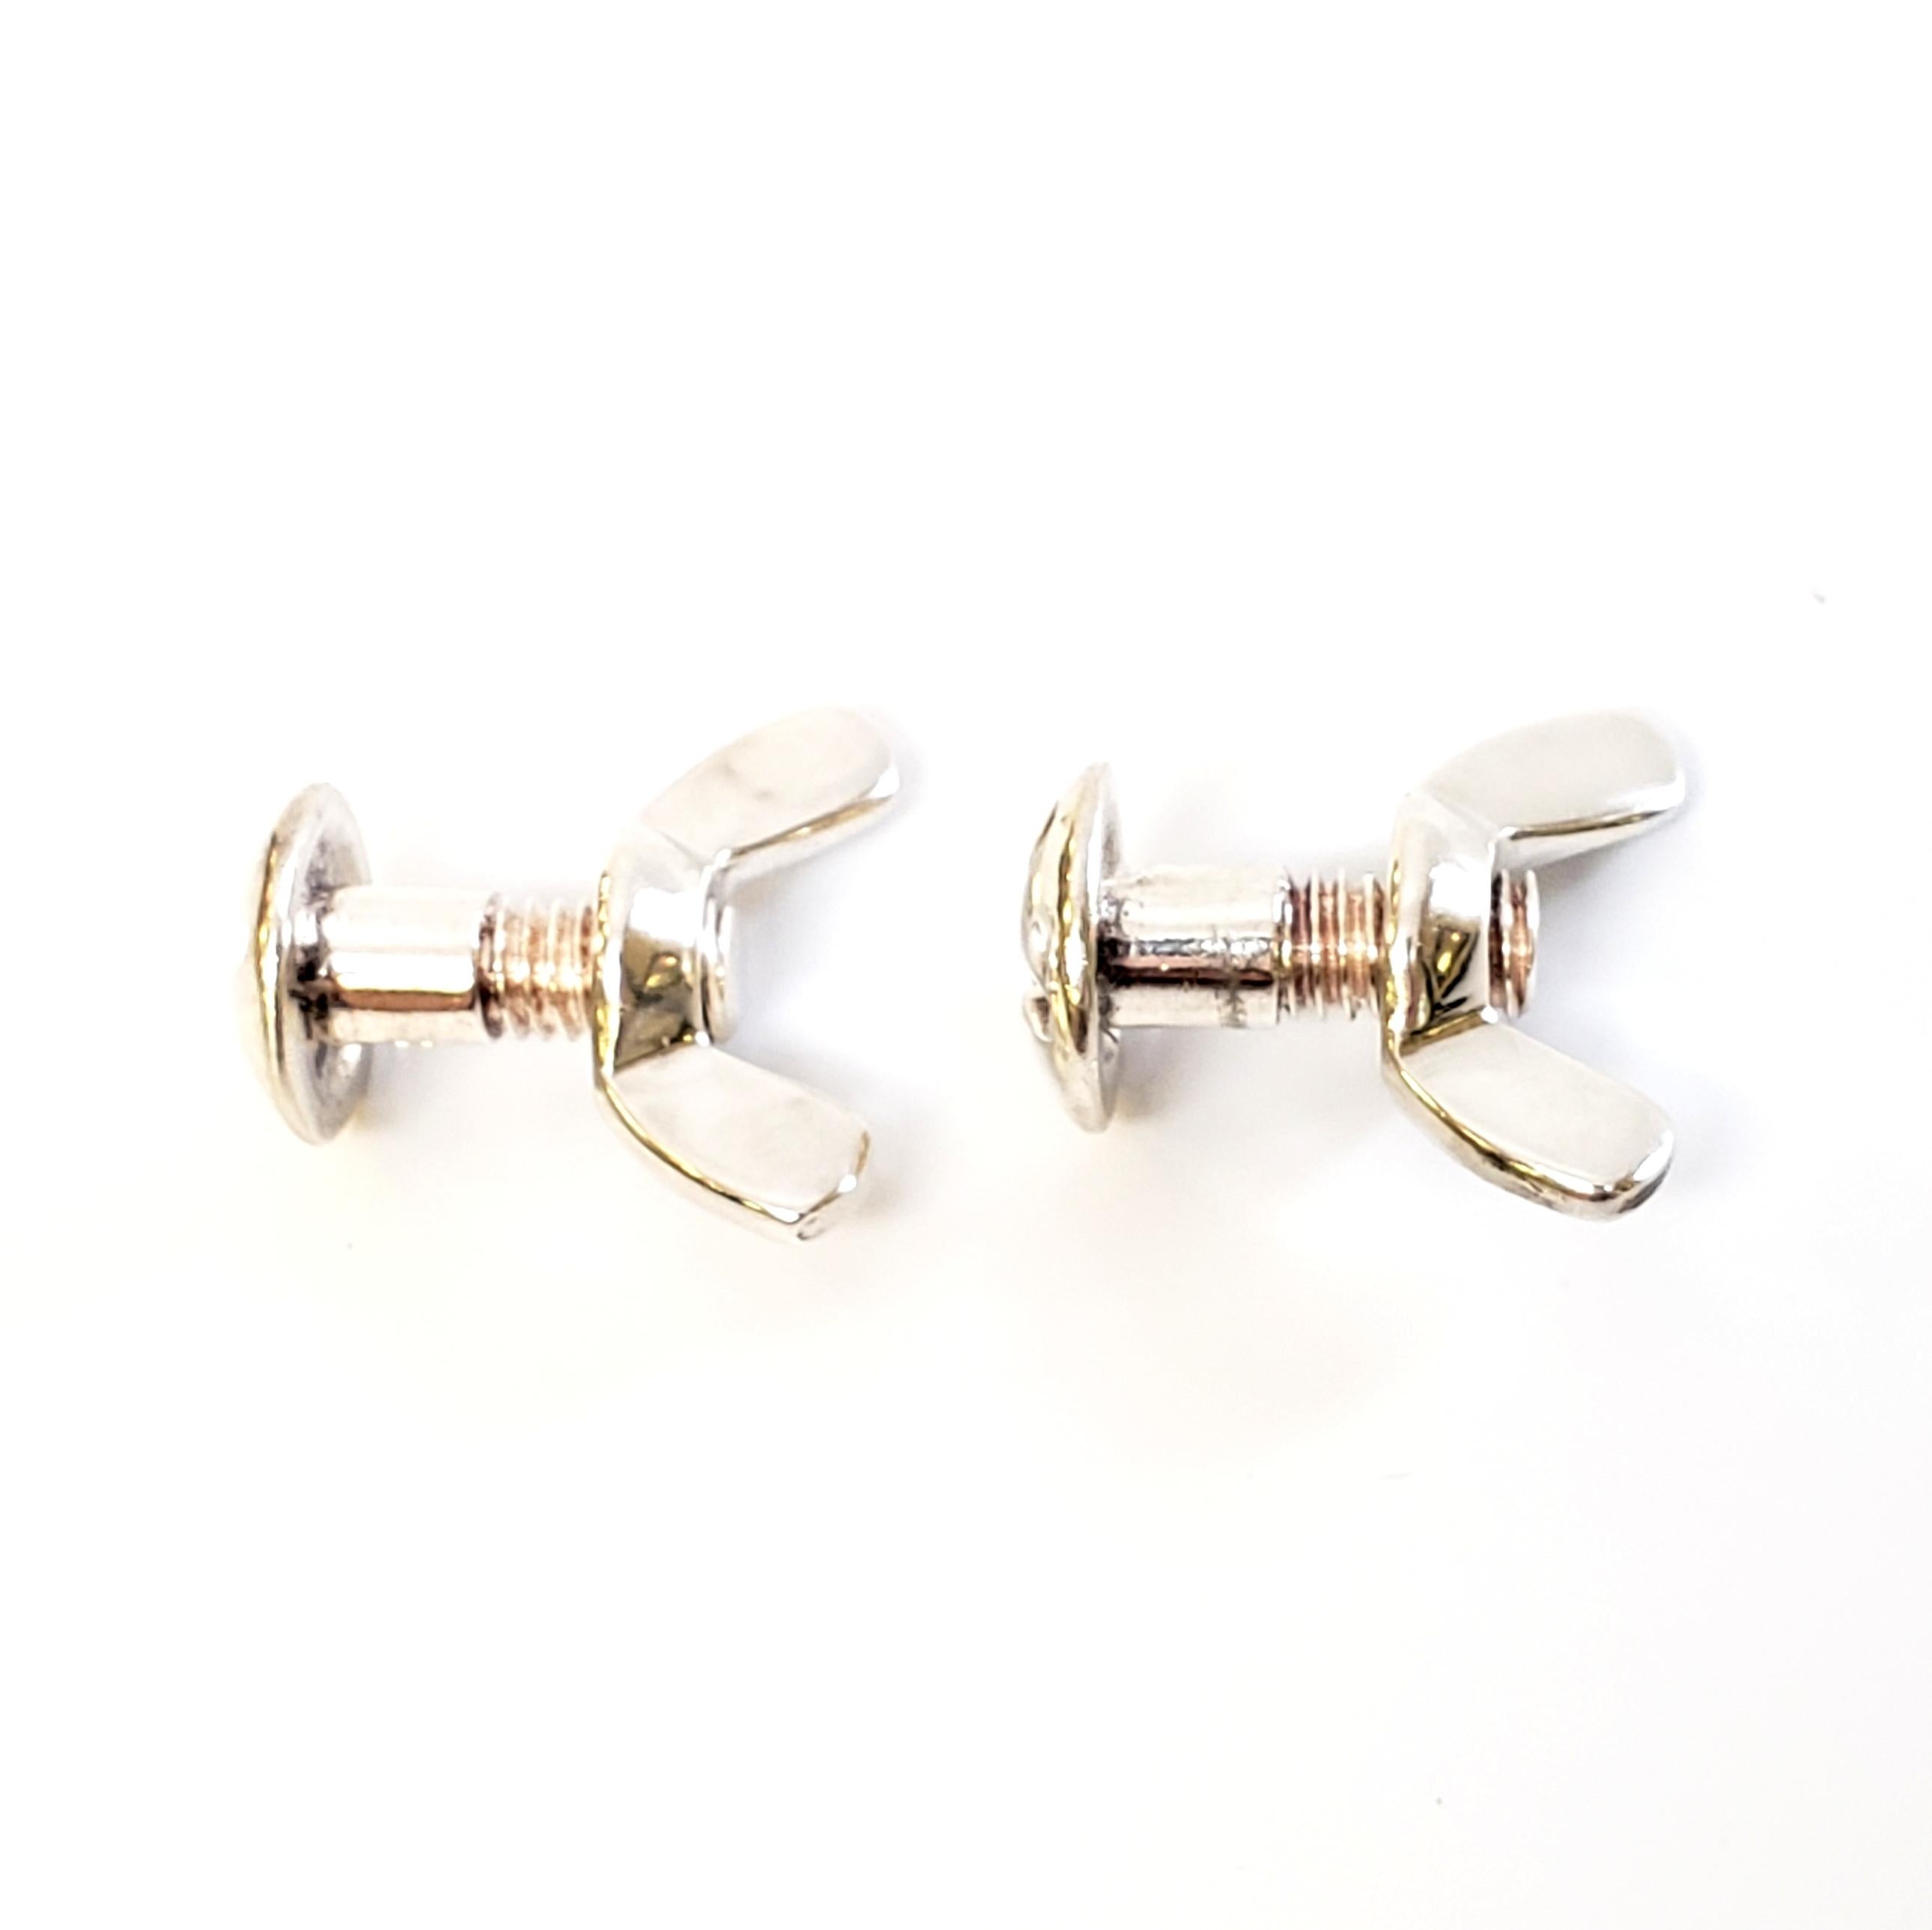 Men's English Sterling Silver Wing Nut and Bolt Cufflinks